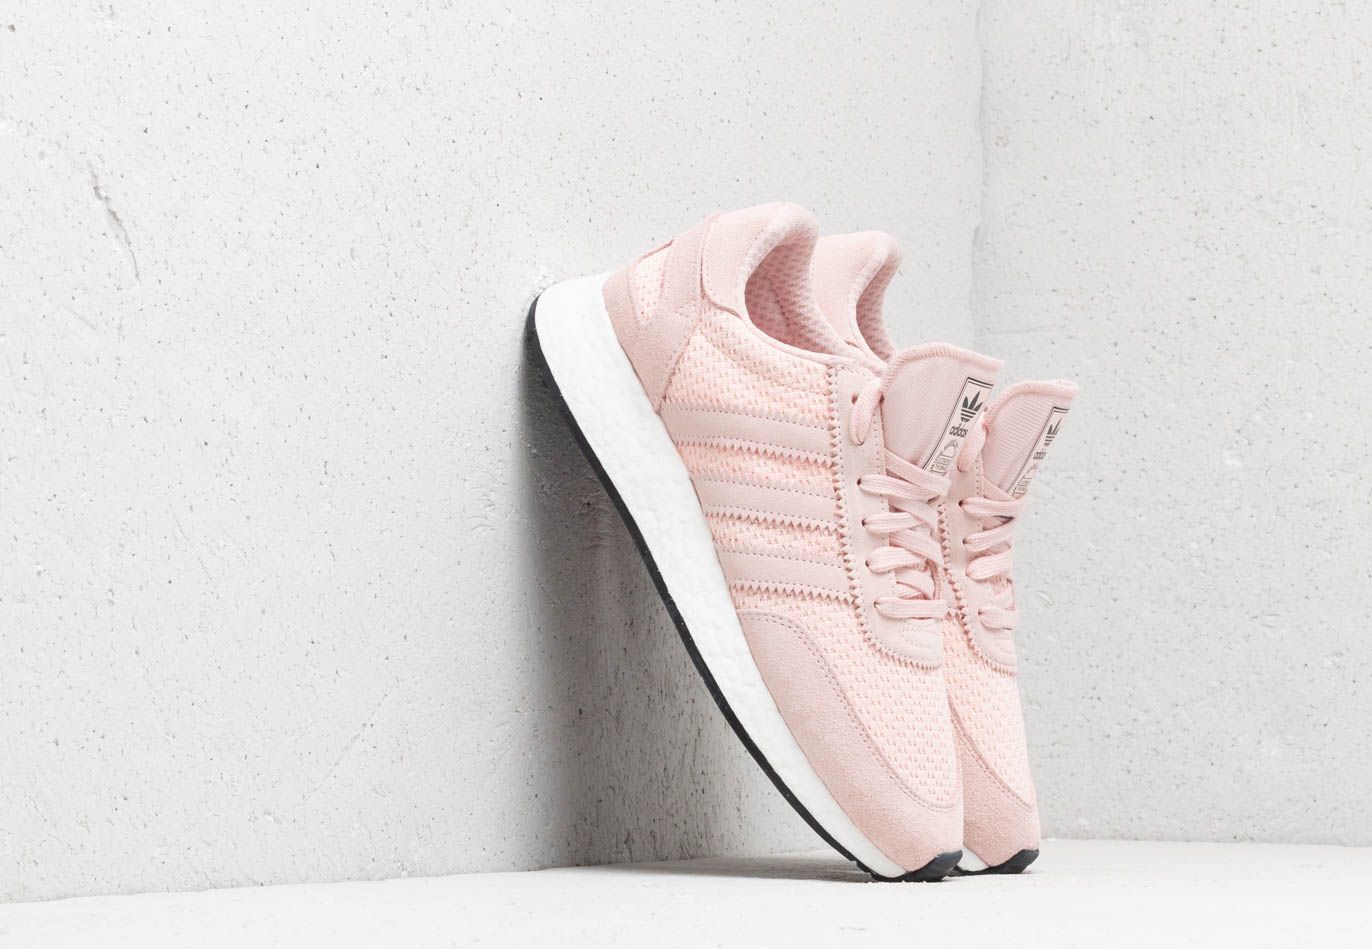 adidas I-5923 Icey Pink/ Icey Pink/ Core Black